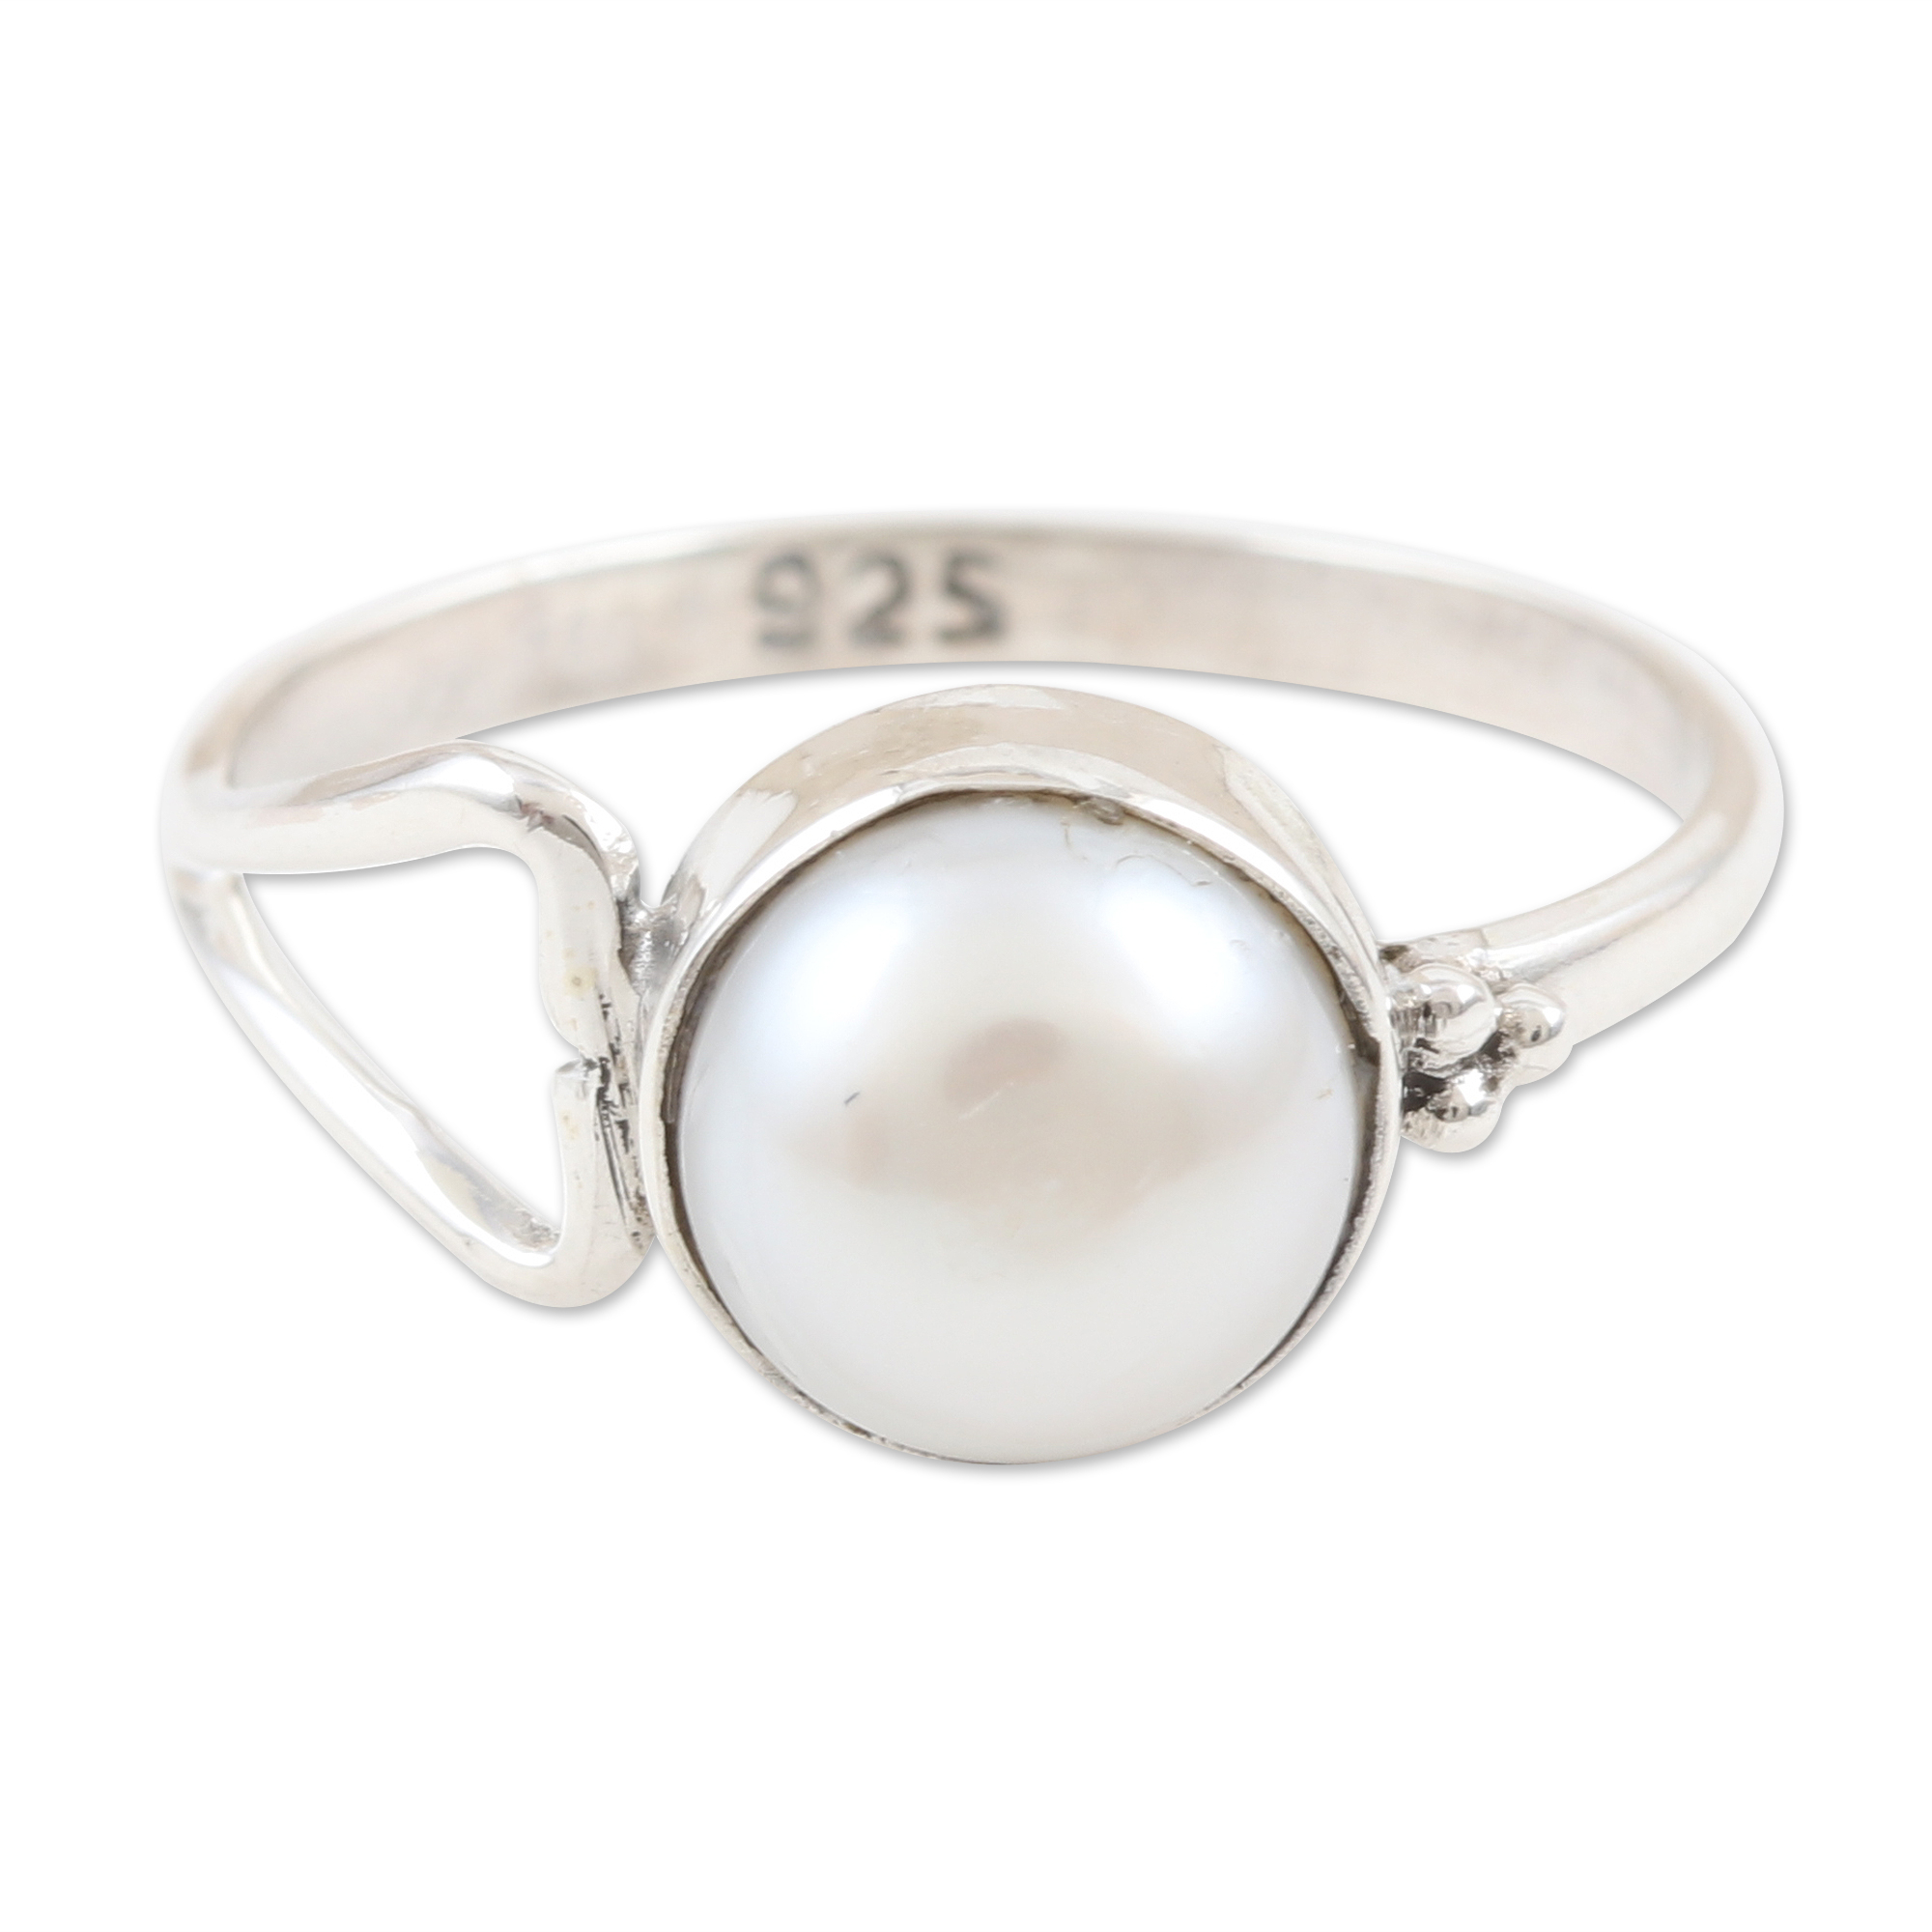 Buy Mens Pearl Ring Online In India - Etsy India